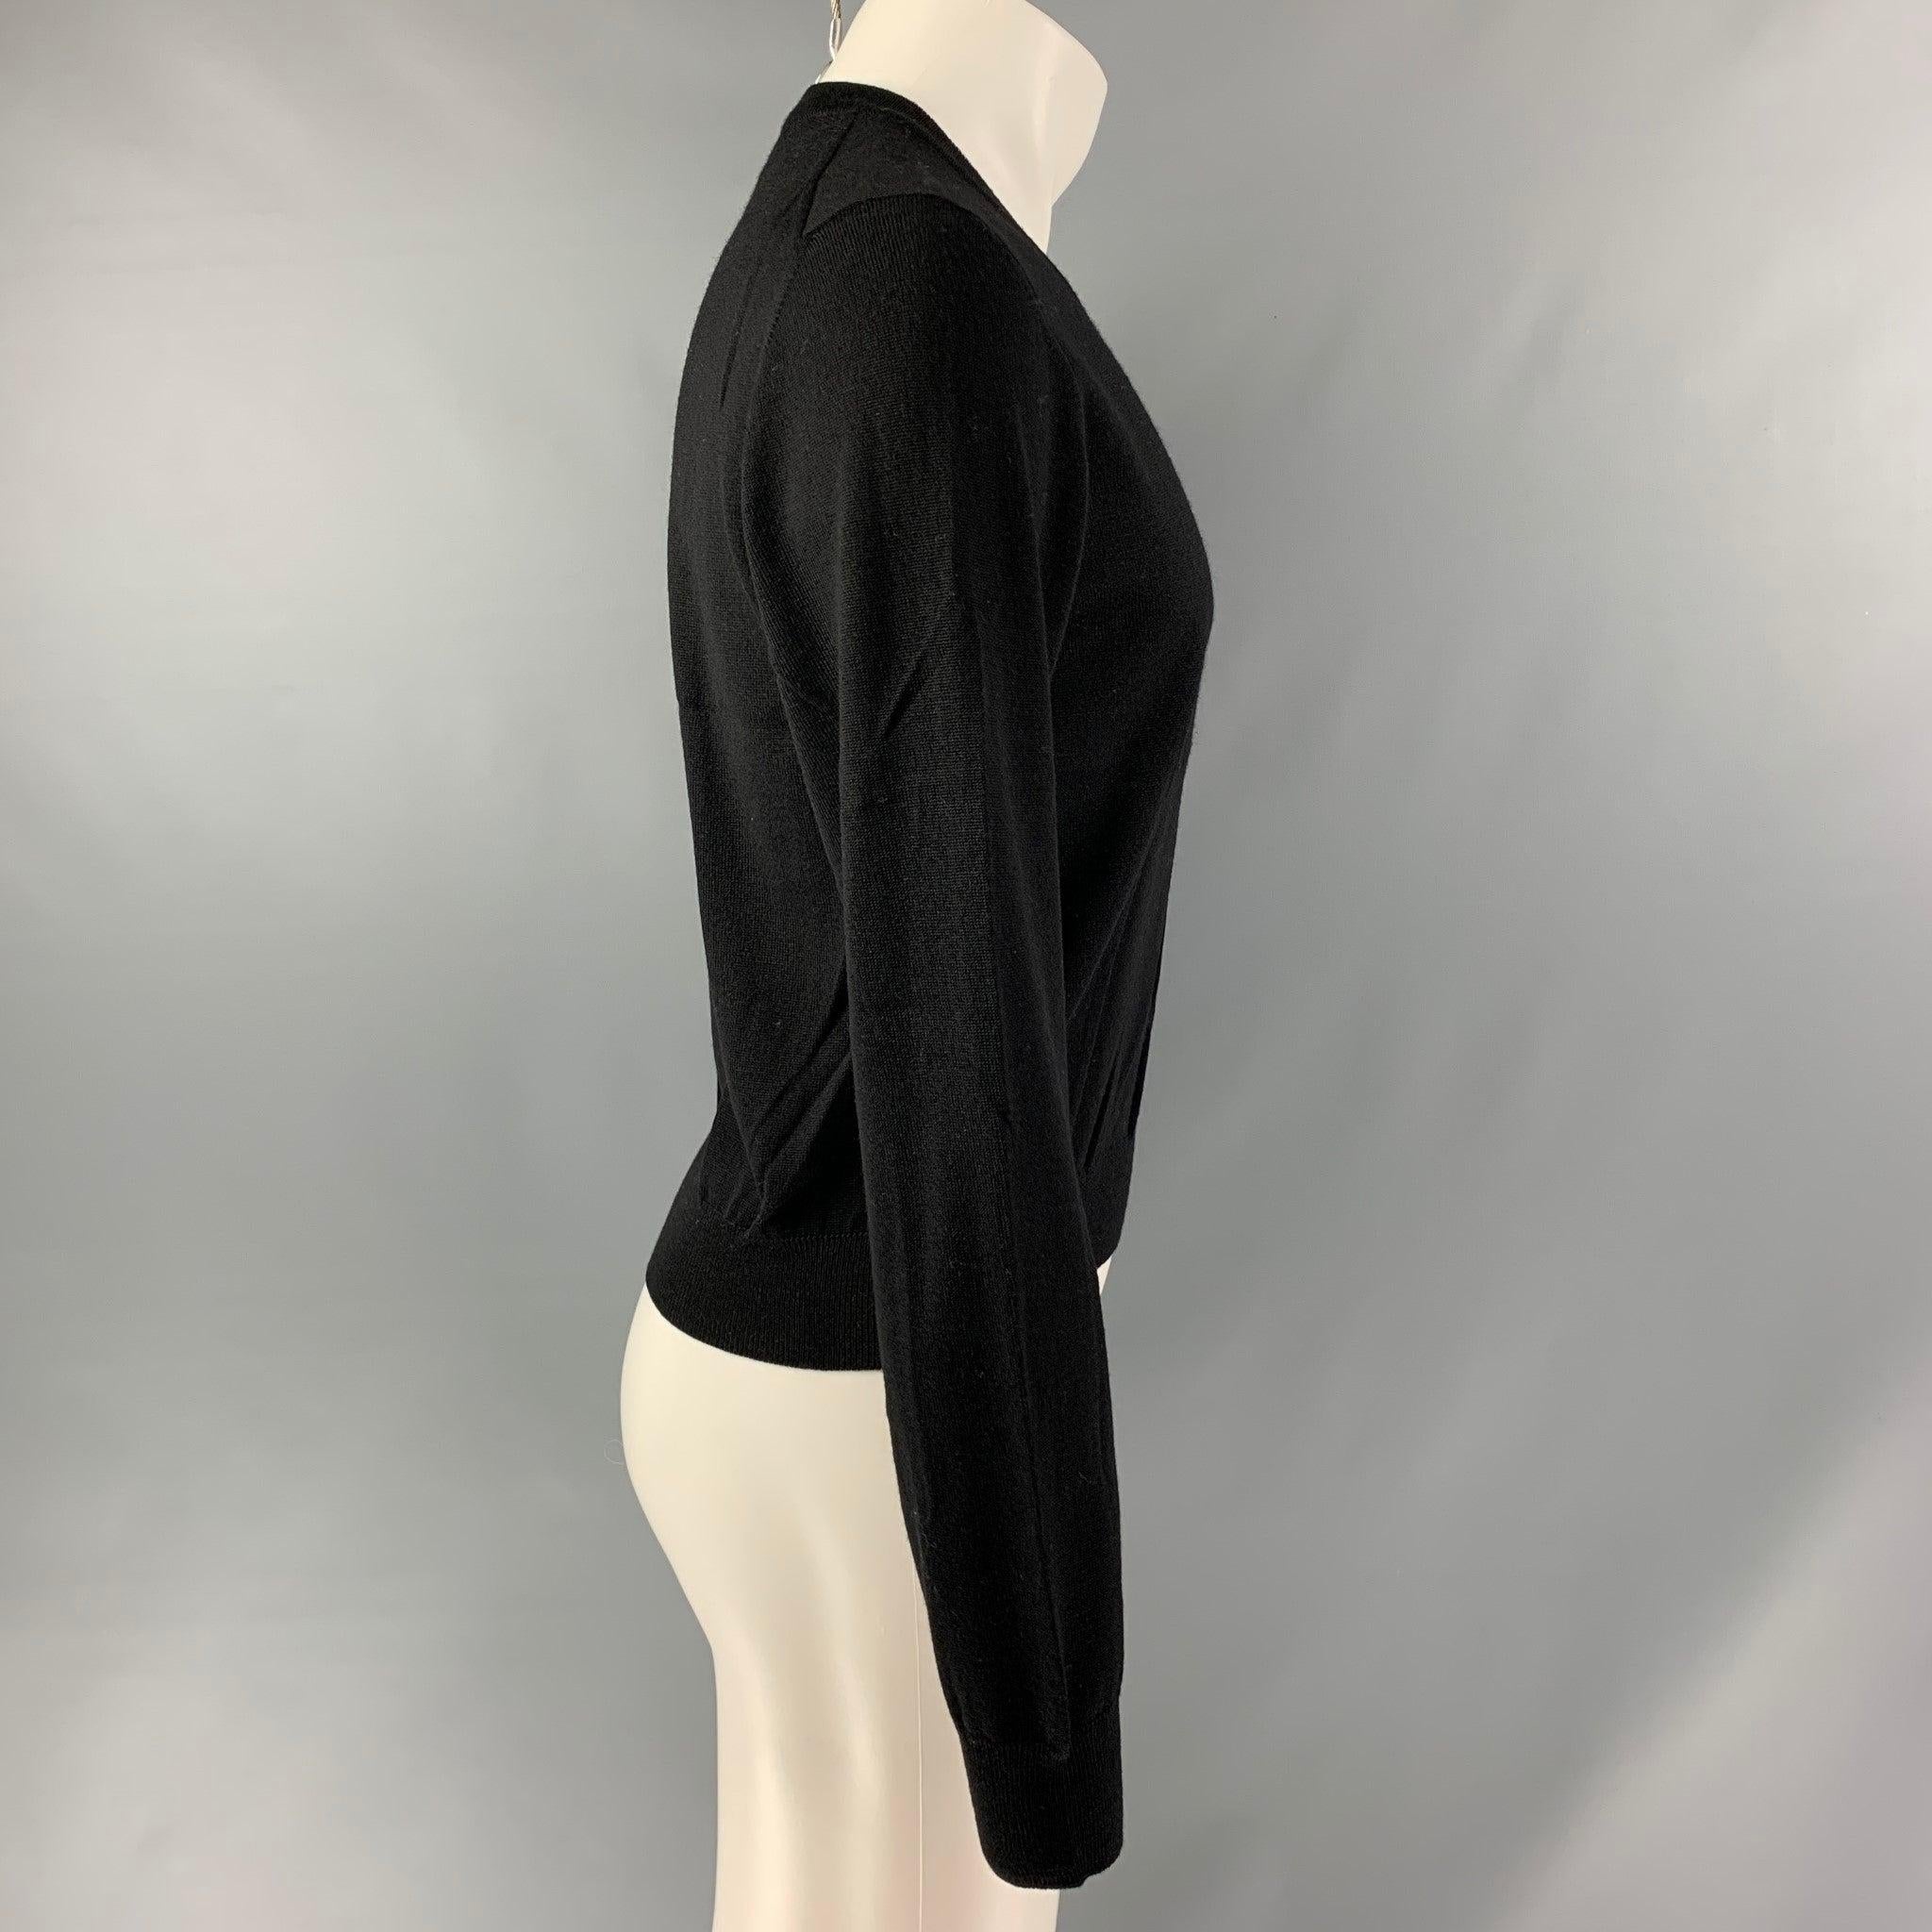 DOLCE & GABBANA pullover comes in a black wool jersey knit featuring a v-neck. Made in Italy. Very Good Pre-Owned Condition. 

Marked:   48 

Measurements: 
 
Shoulder: 17.5 inches Chest: 46 inches Sleeve: 26 inches Length: 22.5 inches  
  
  
